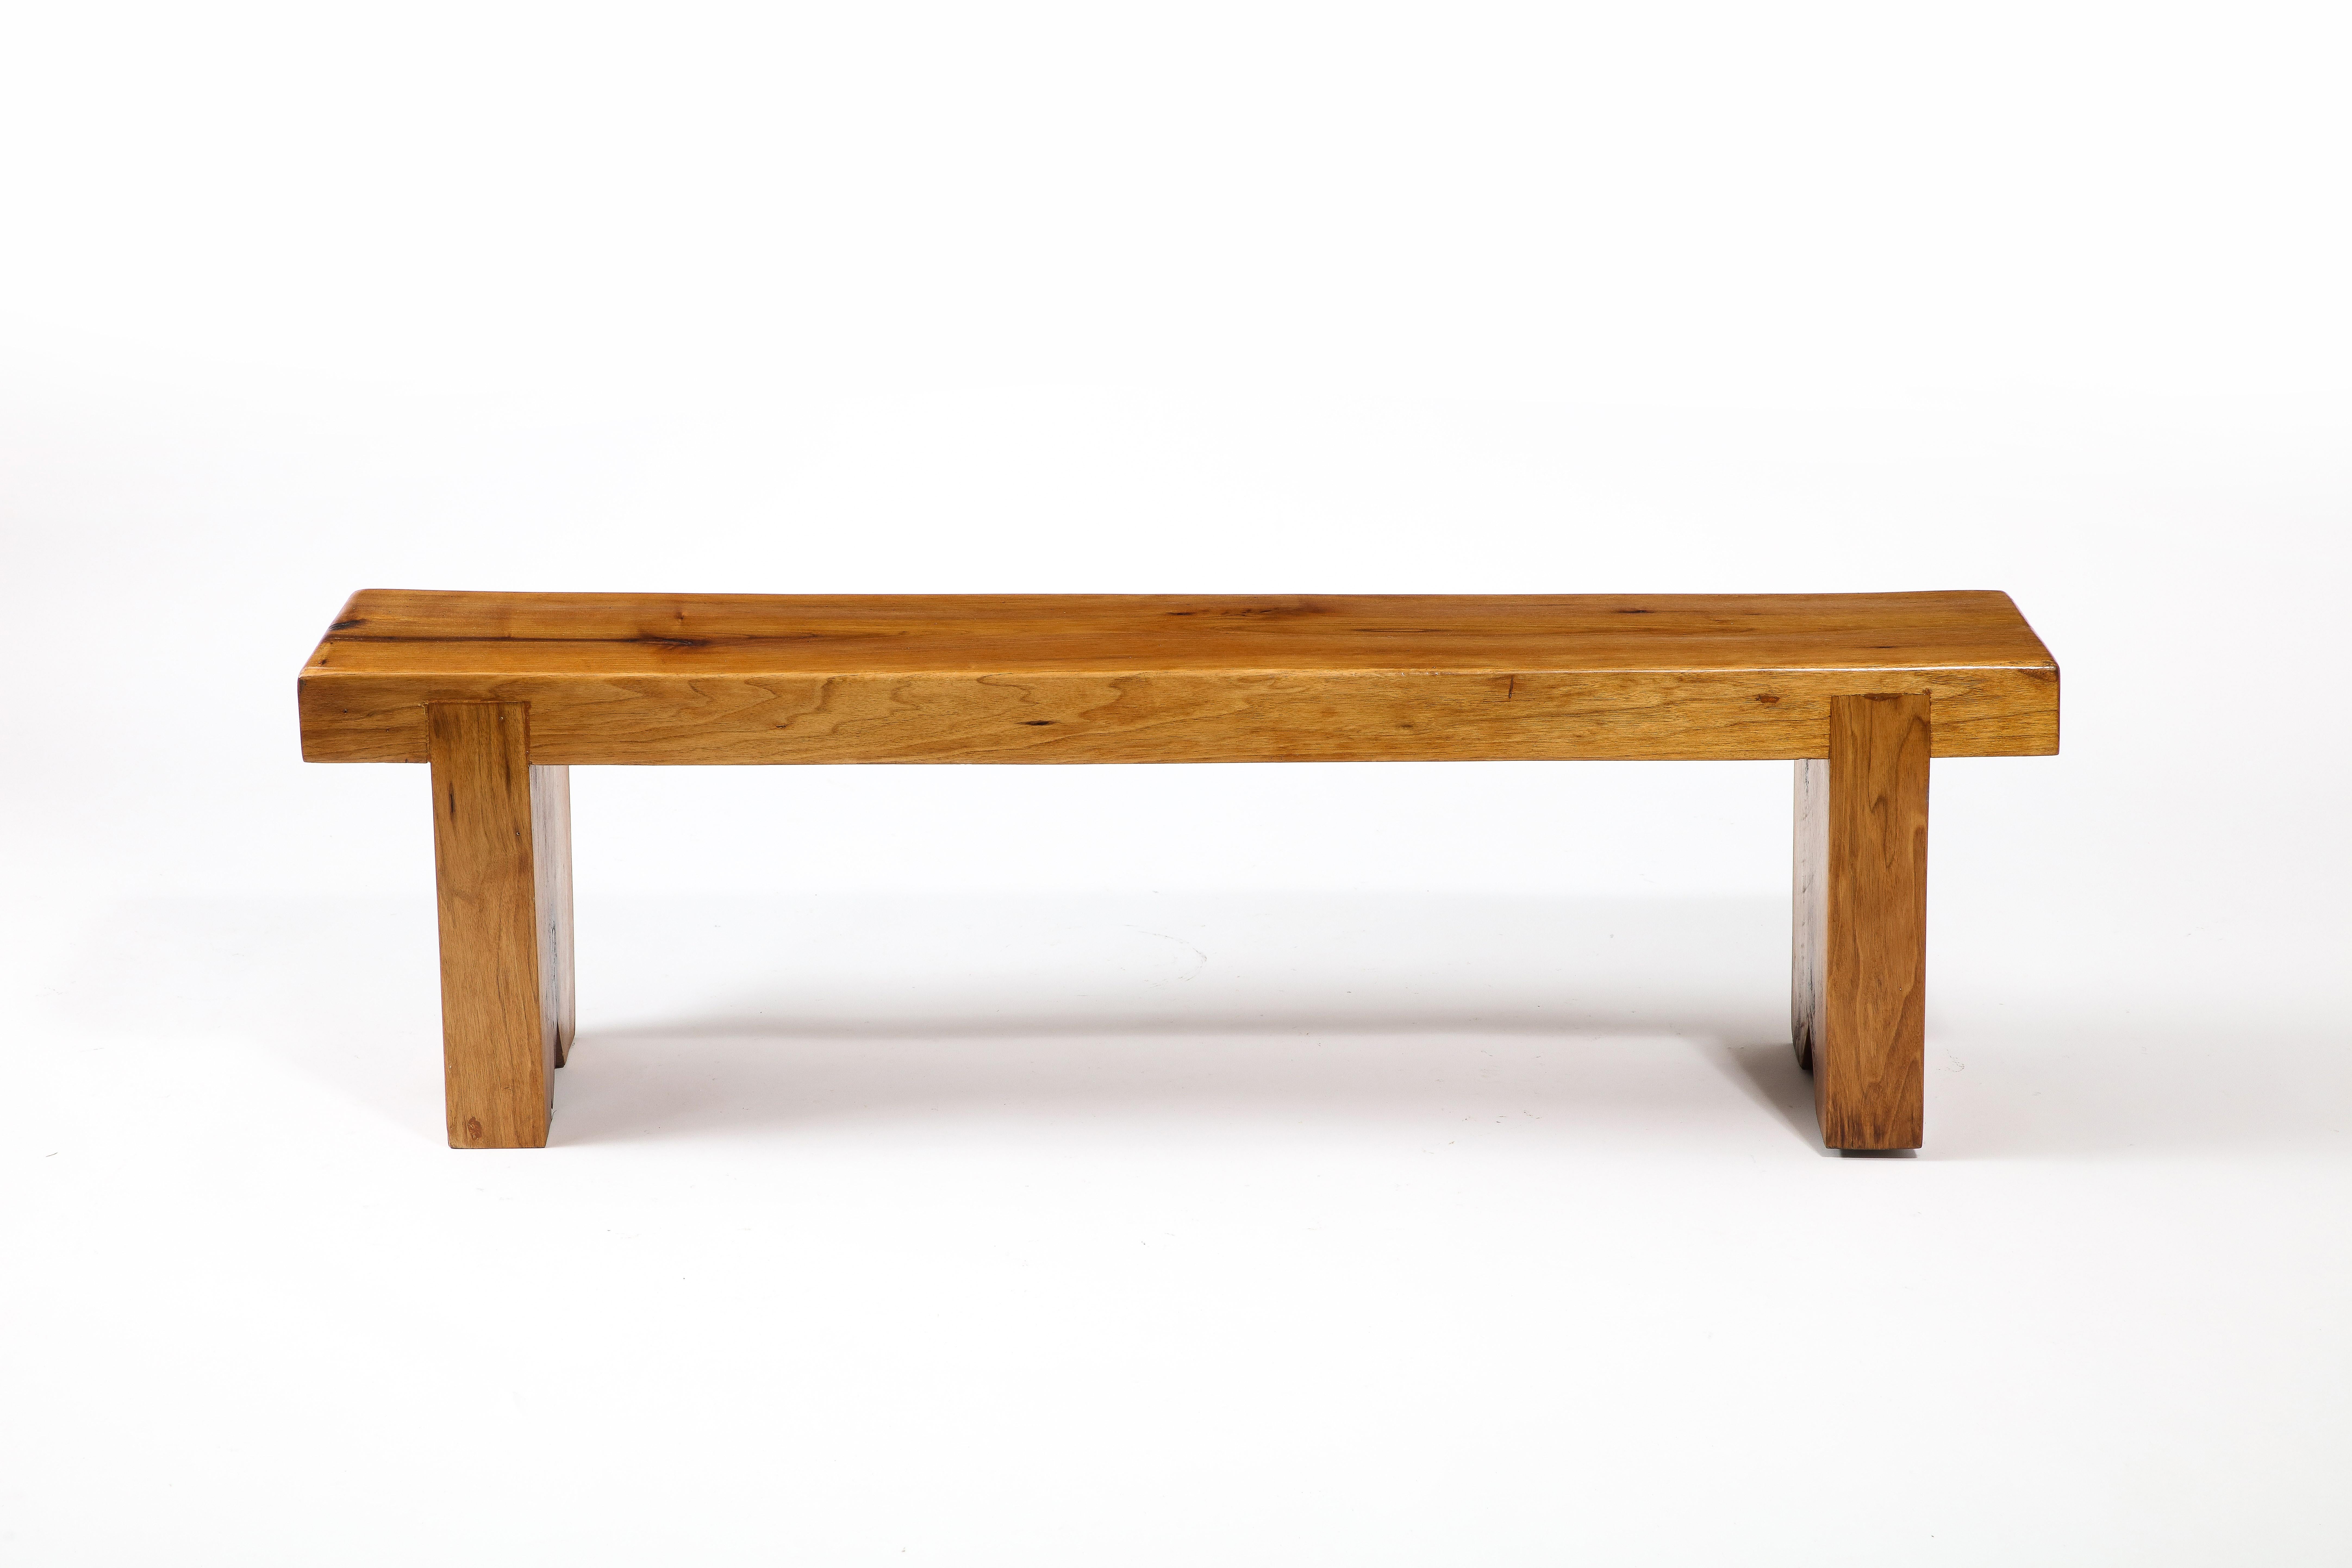 A solid Elm bench made of three parts with a large notched construction.